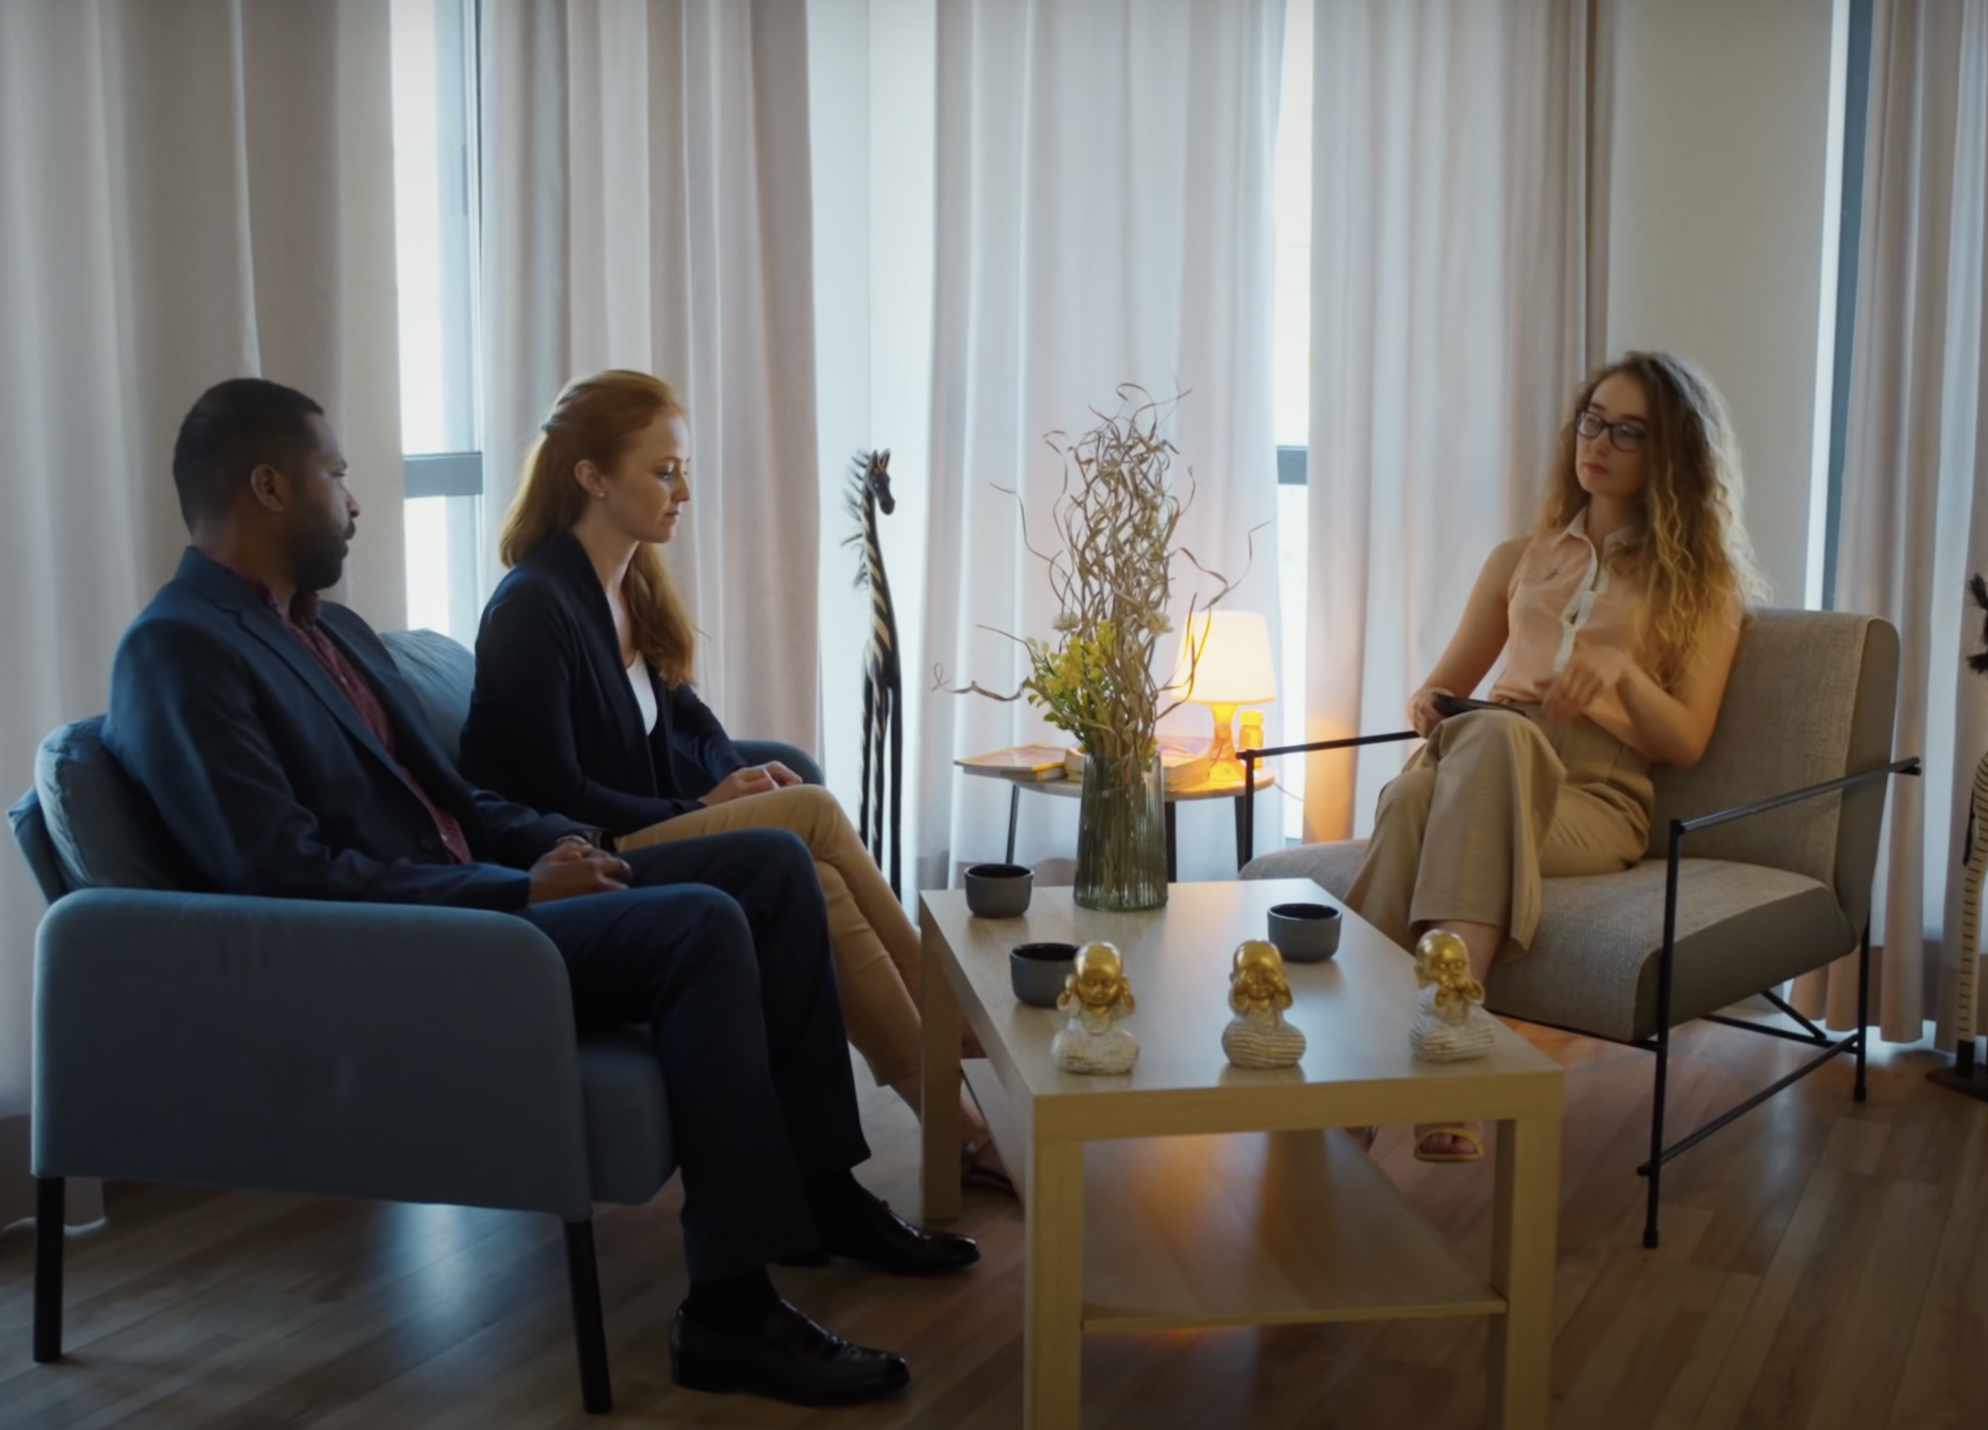 Man and his wife at a session with a therapist | Source: YouTube / DramatizeMe